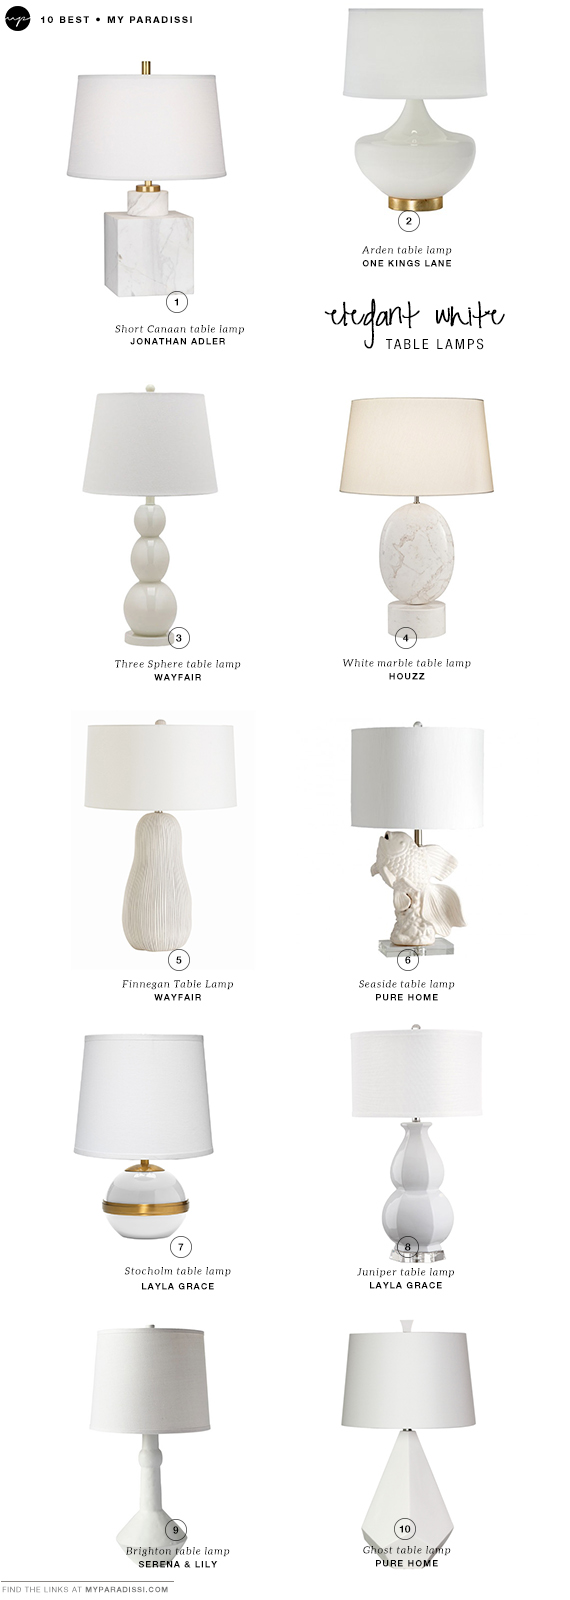 10 Best Elegant White Table Lamps My, Table Lamps Under 10